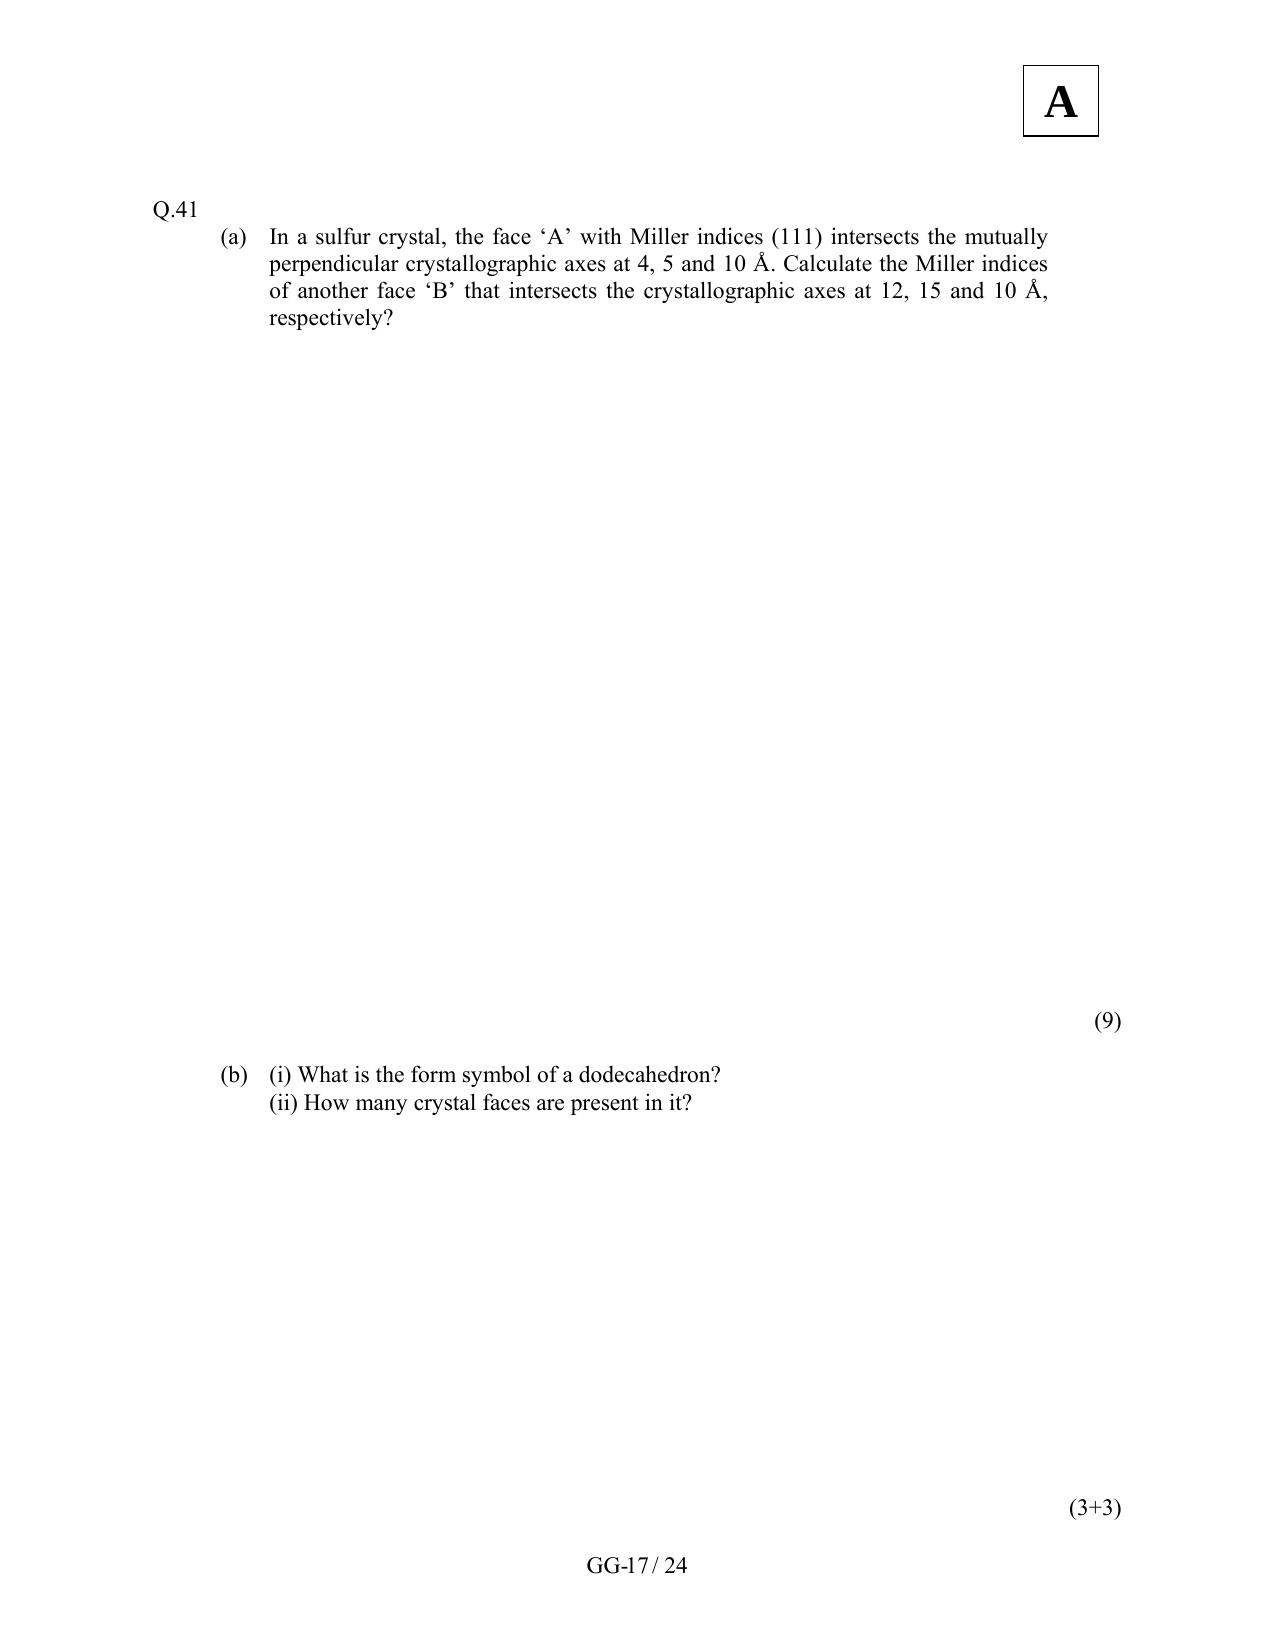 JAM 2012: GG Question Paper - Page 19